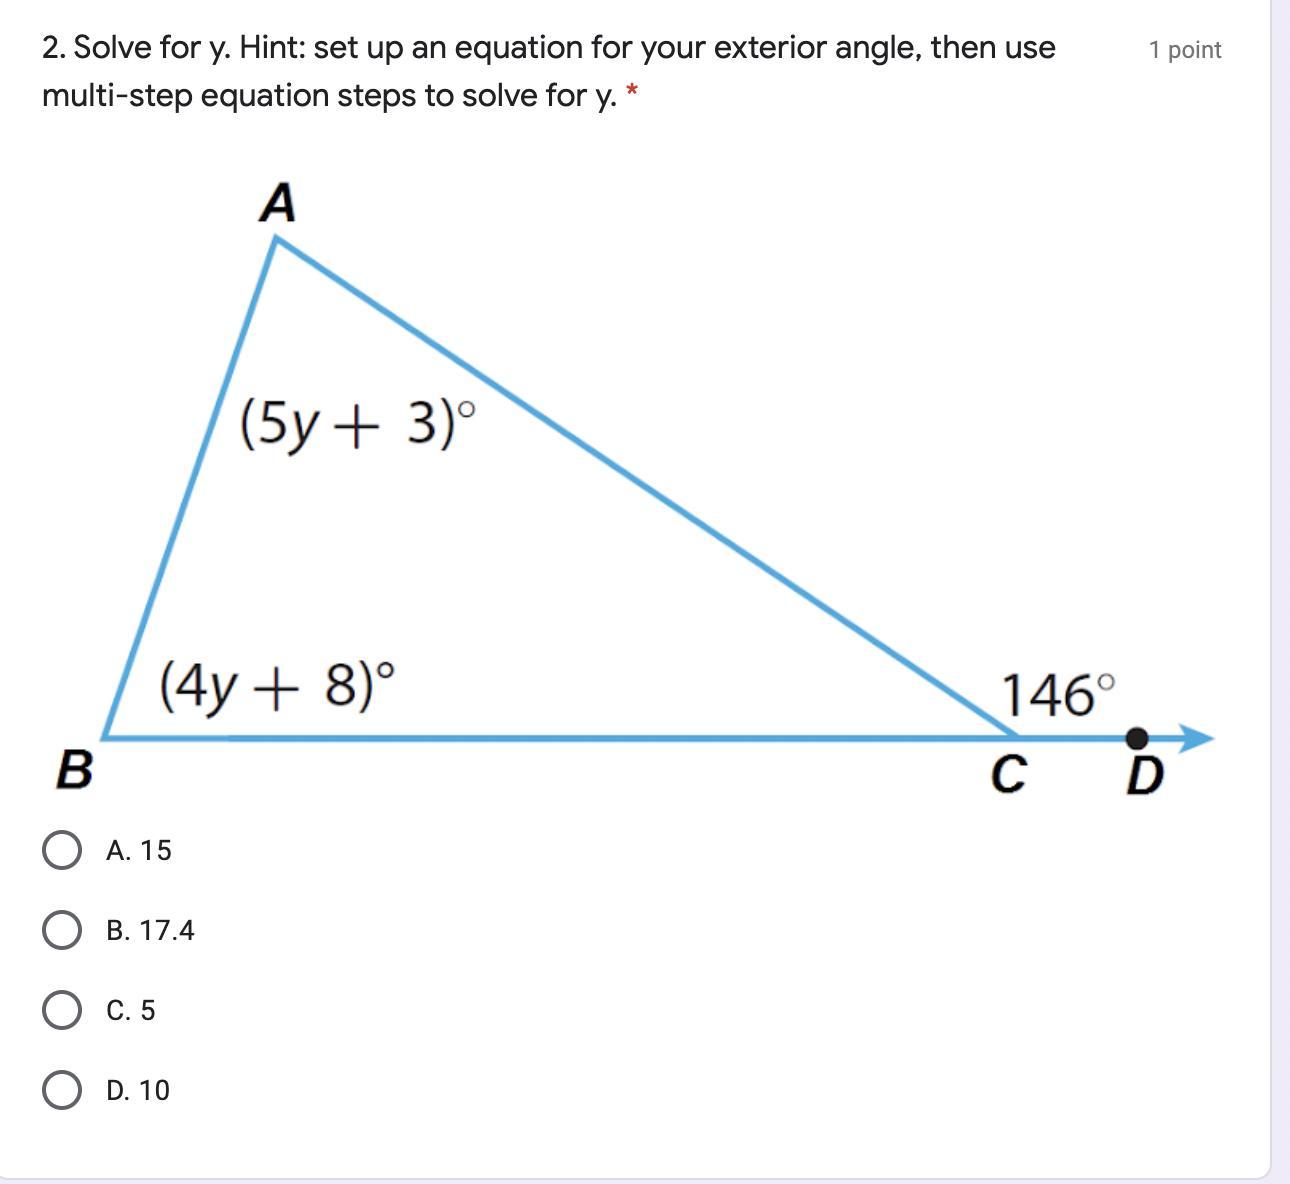 Set Up An Equation For Your Exterior Angle, Then Use Multi-step Equation Steps To Solve For Y.A. 15B.